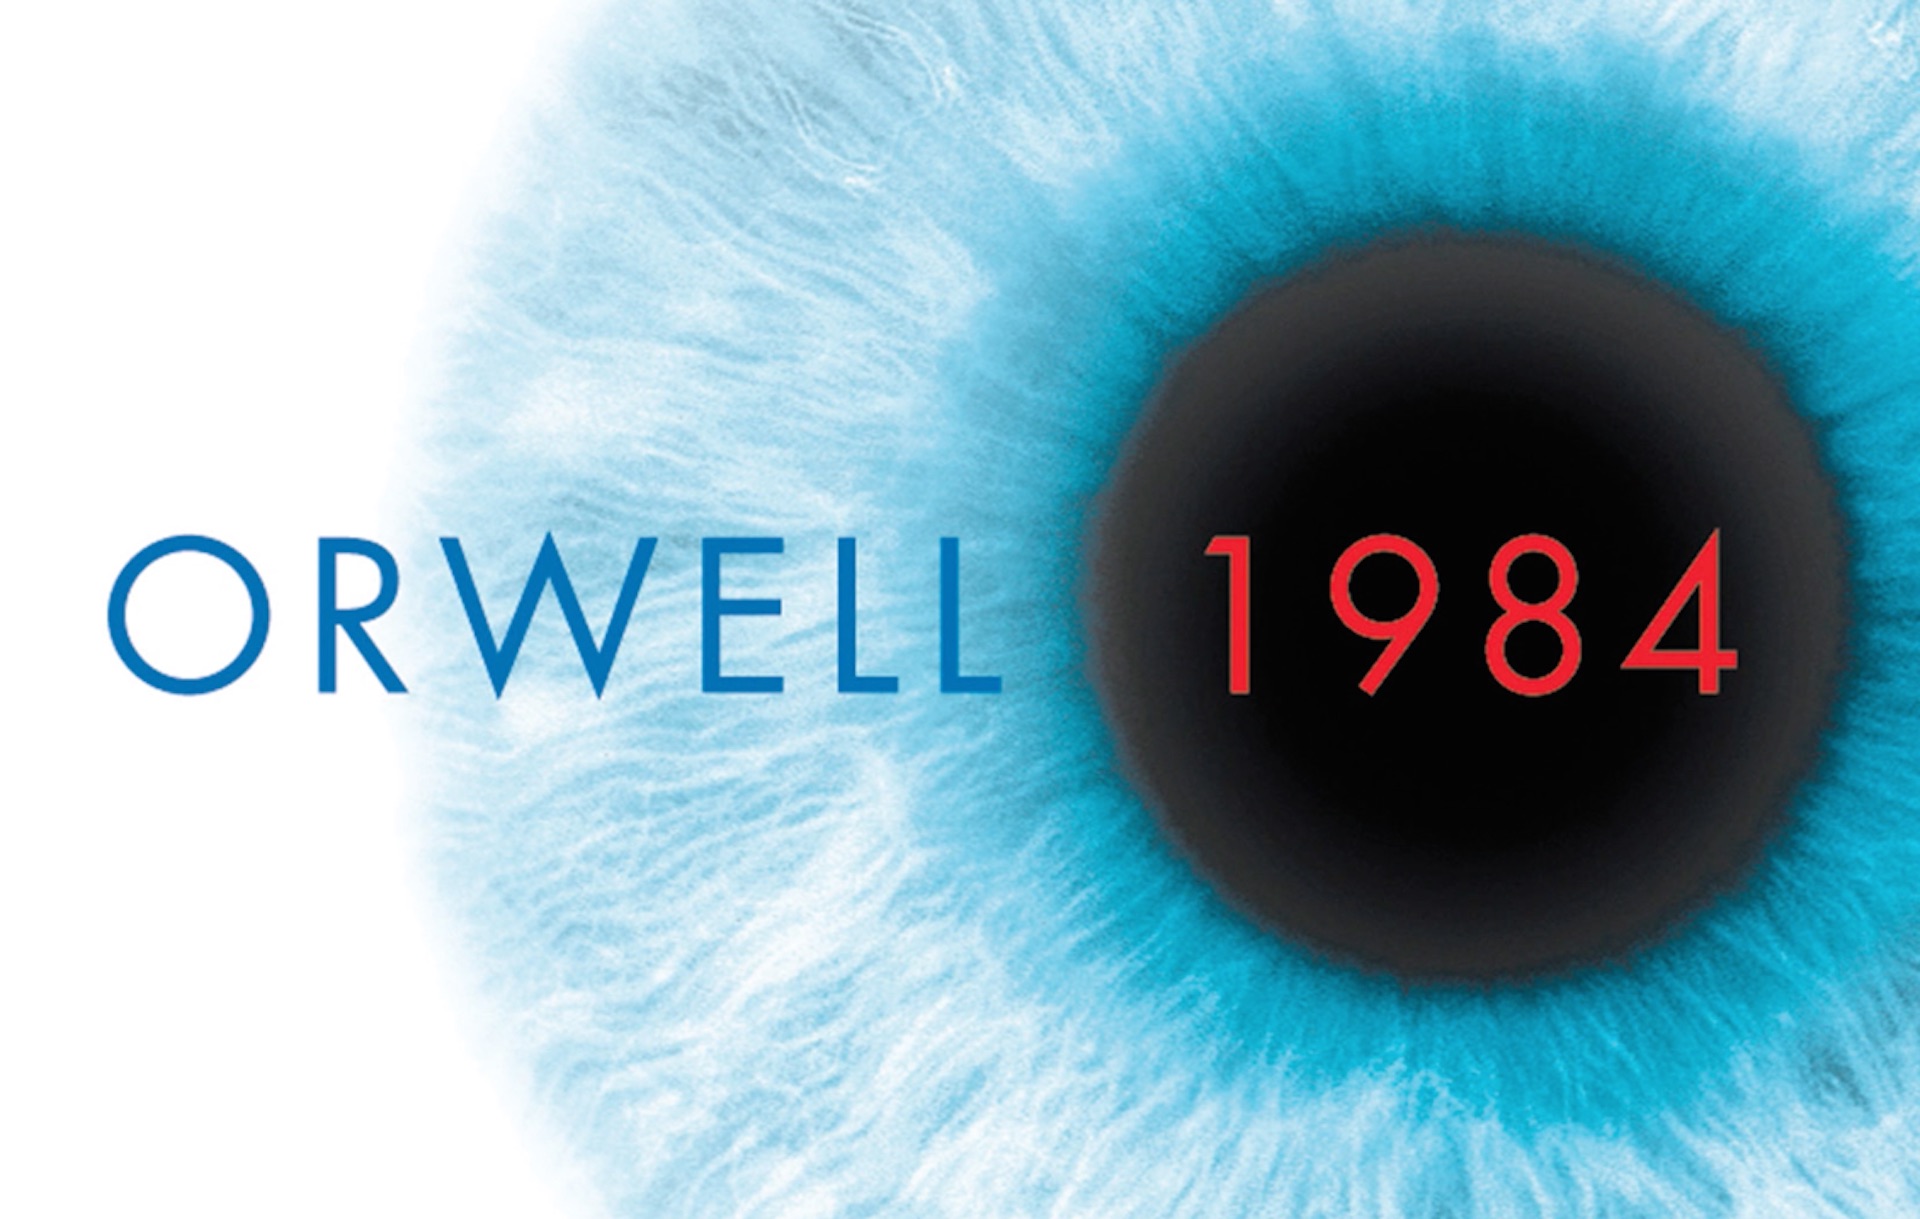 Why Orwell's '1984' matters so much now - The Washington Post